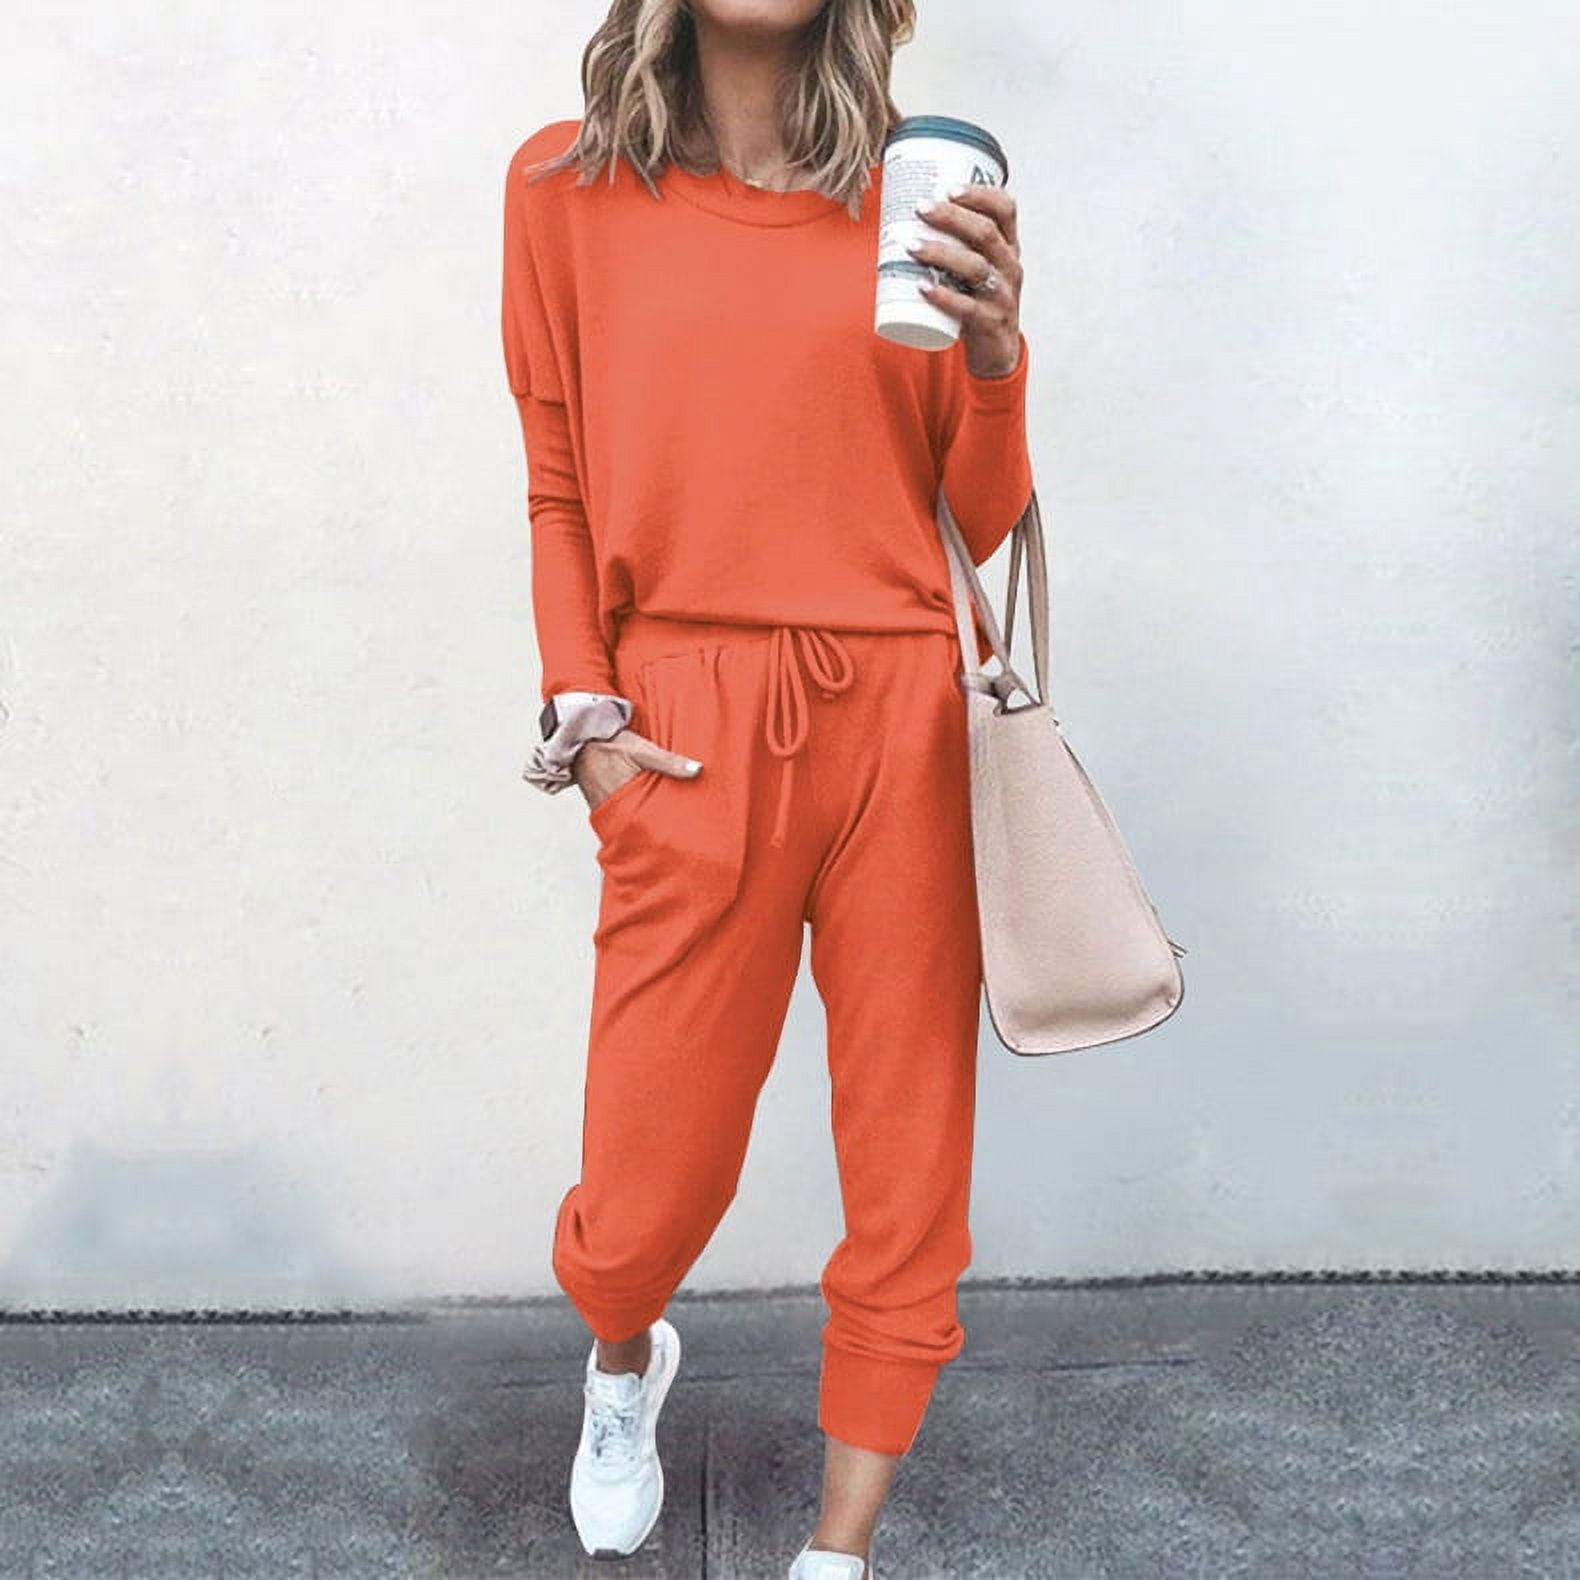 Women's Two Piece Outfits Sweater Sets Long Sleeve Pullover and Drawstring  Pants Lounge Sets